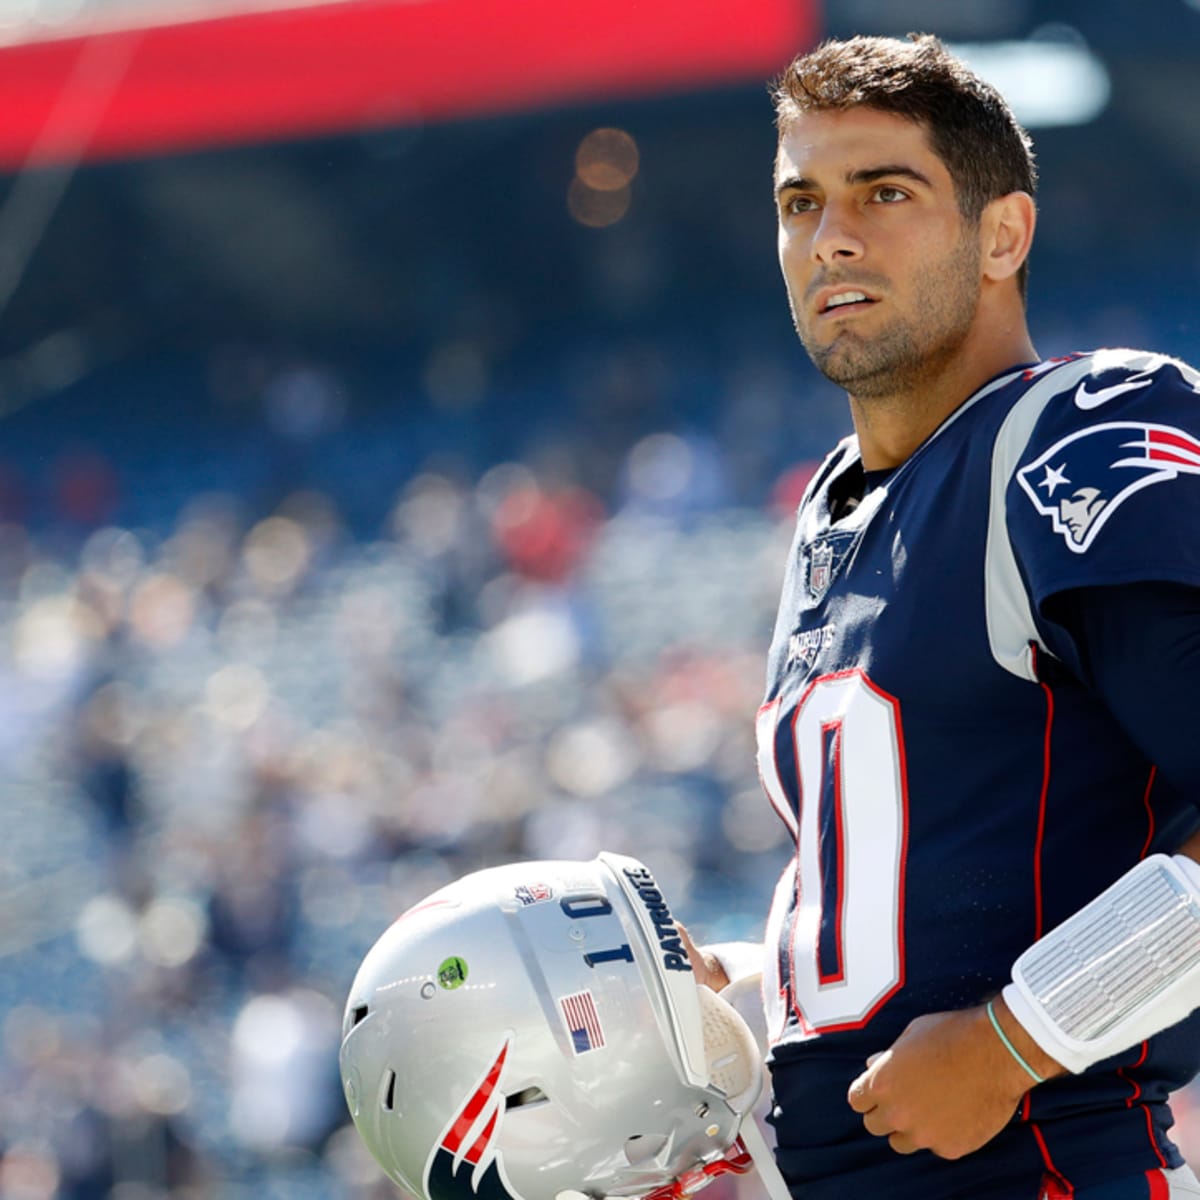 San Francisco 49ers win Jimmy Garoppolo trade with Pats - Sports Illustrated